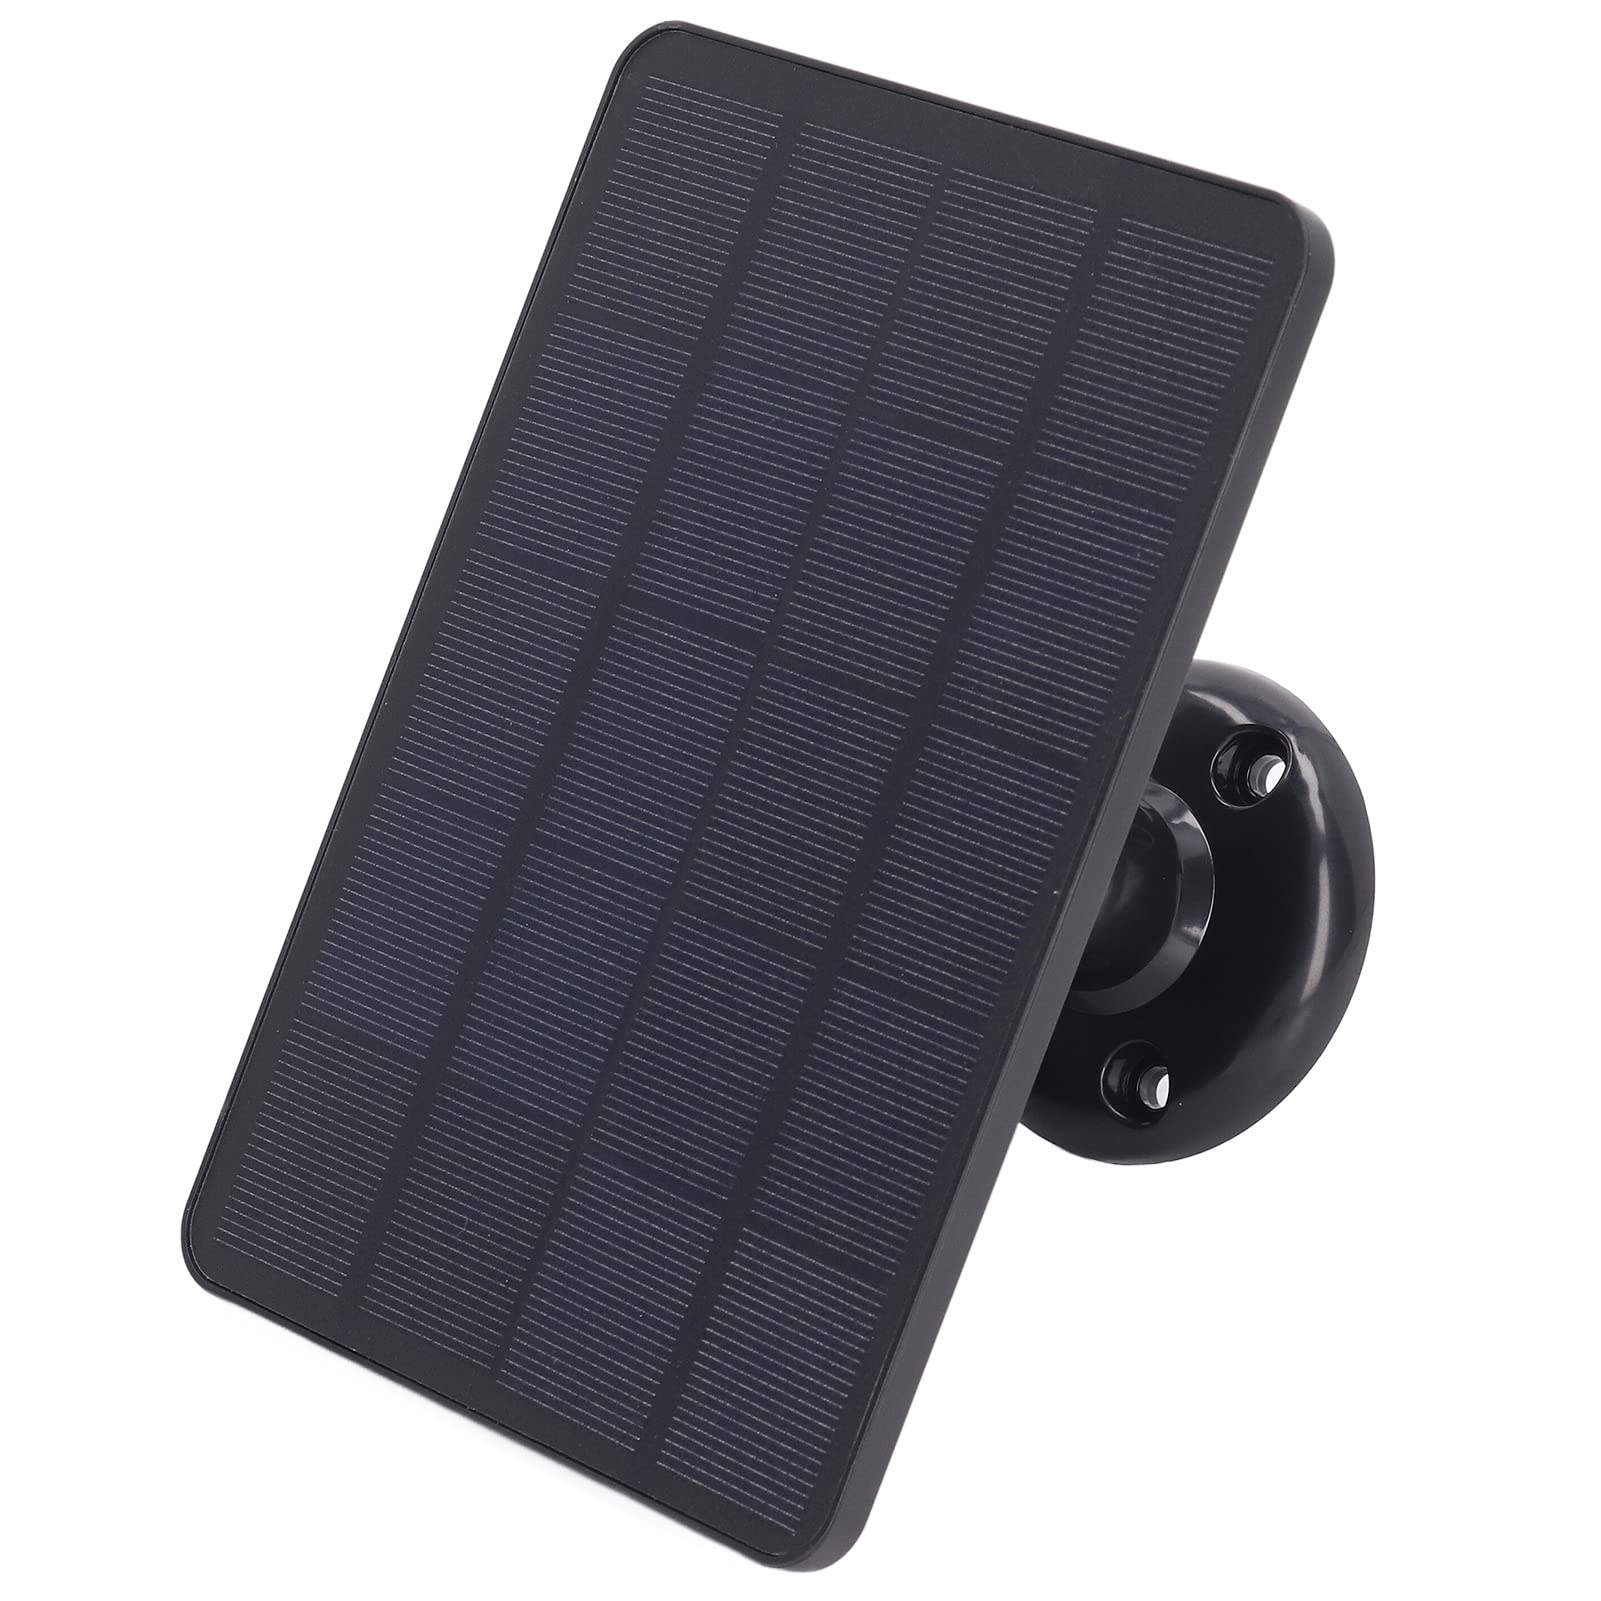 Solar Panel, Easy Installation Monocrystalline Silicon ABS High Efficiency 10W Micro USB Solar Panel Charger for Light (Black)